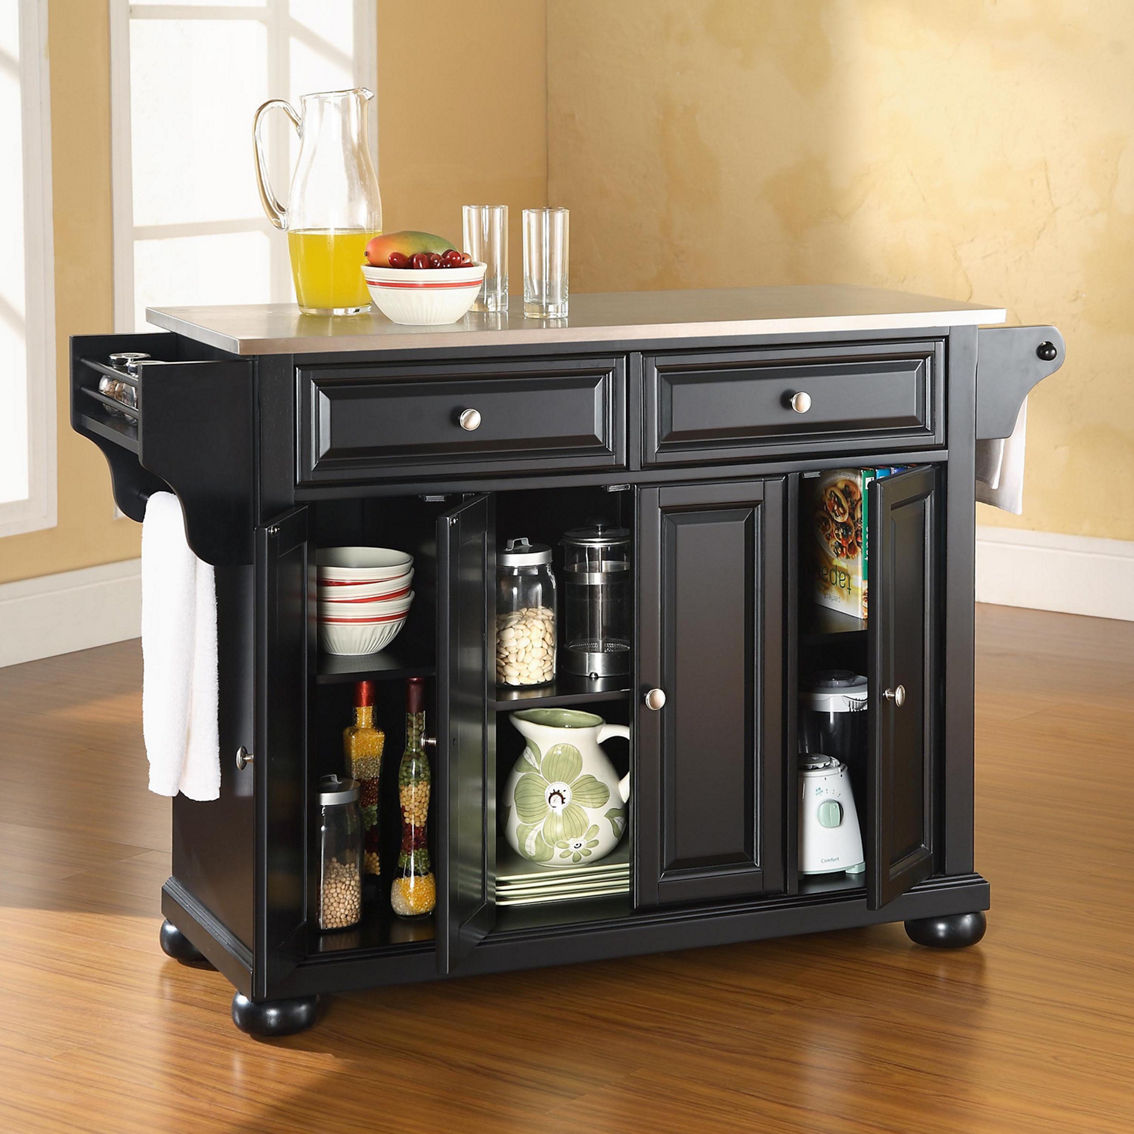 Crosley Furniture Alexandria Stainless Steel Top Full Size Kitchen Island/Cart - Image 4 of 4